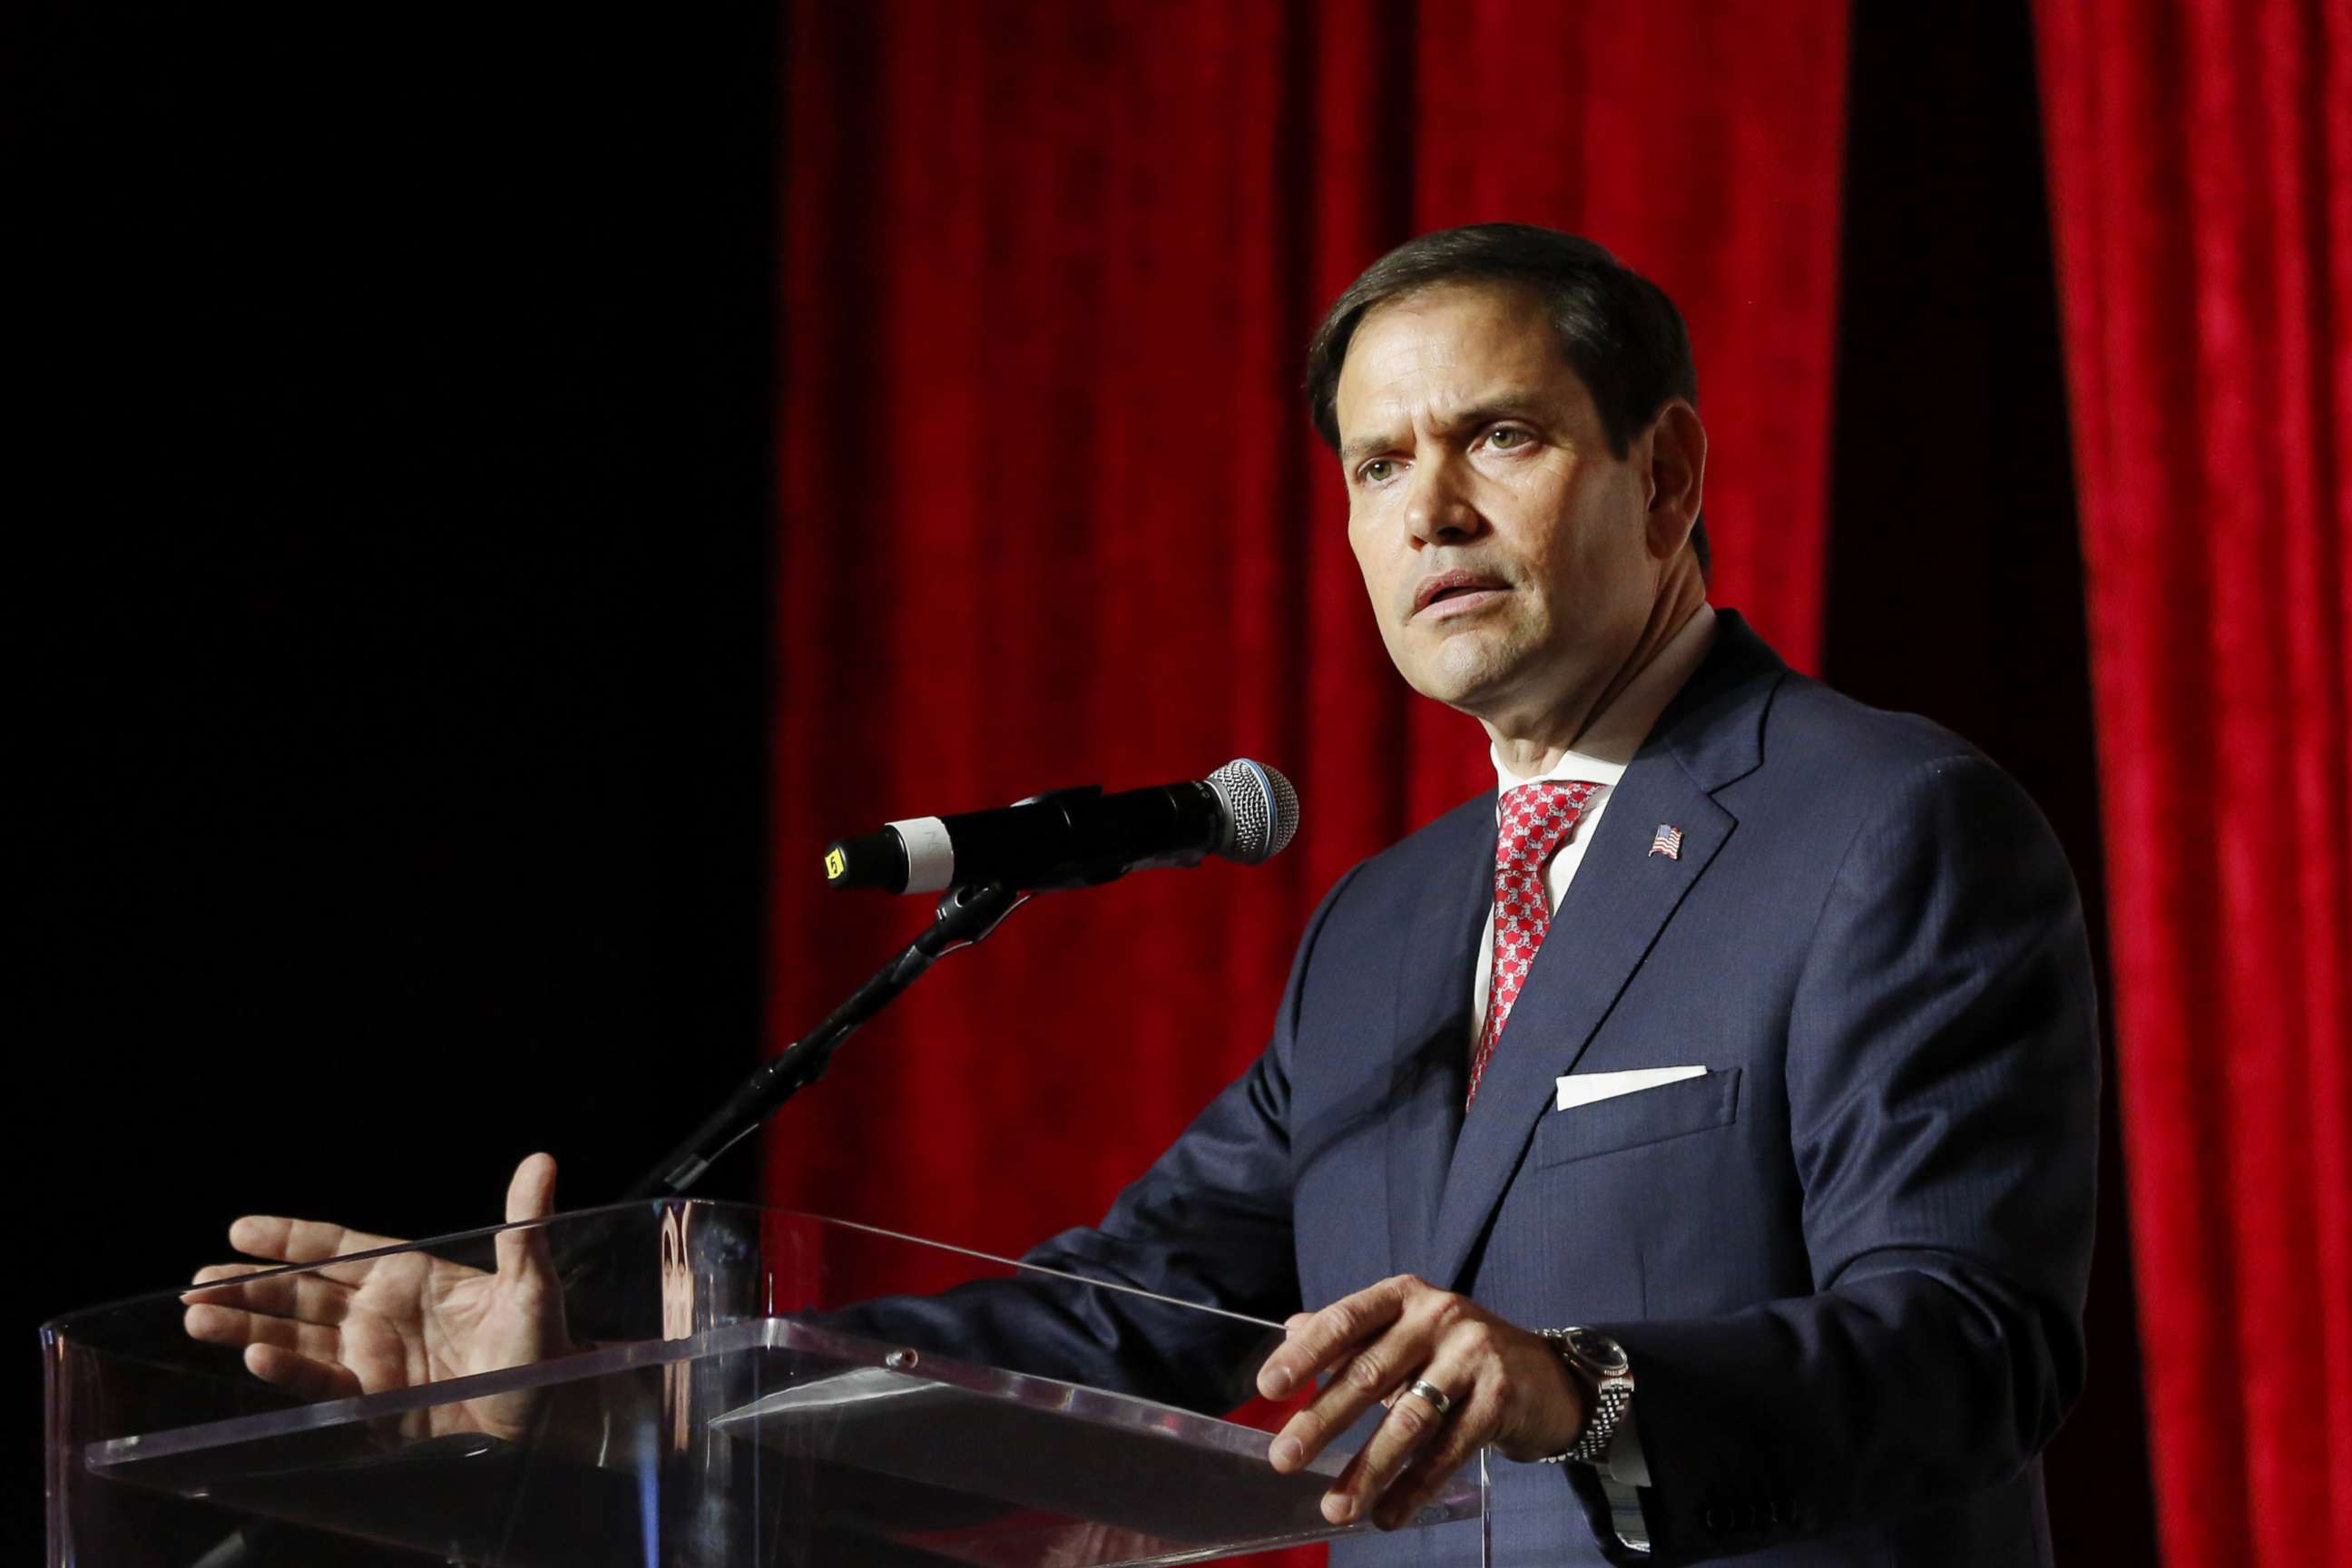 PHOTO: Senator Marco Rubio, a Republican from Florida, speaks during the Republican Party of Florida 2022 Victory Dinner in Hollywood, Fla., July 23, 2022.